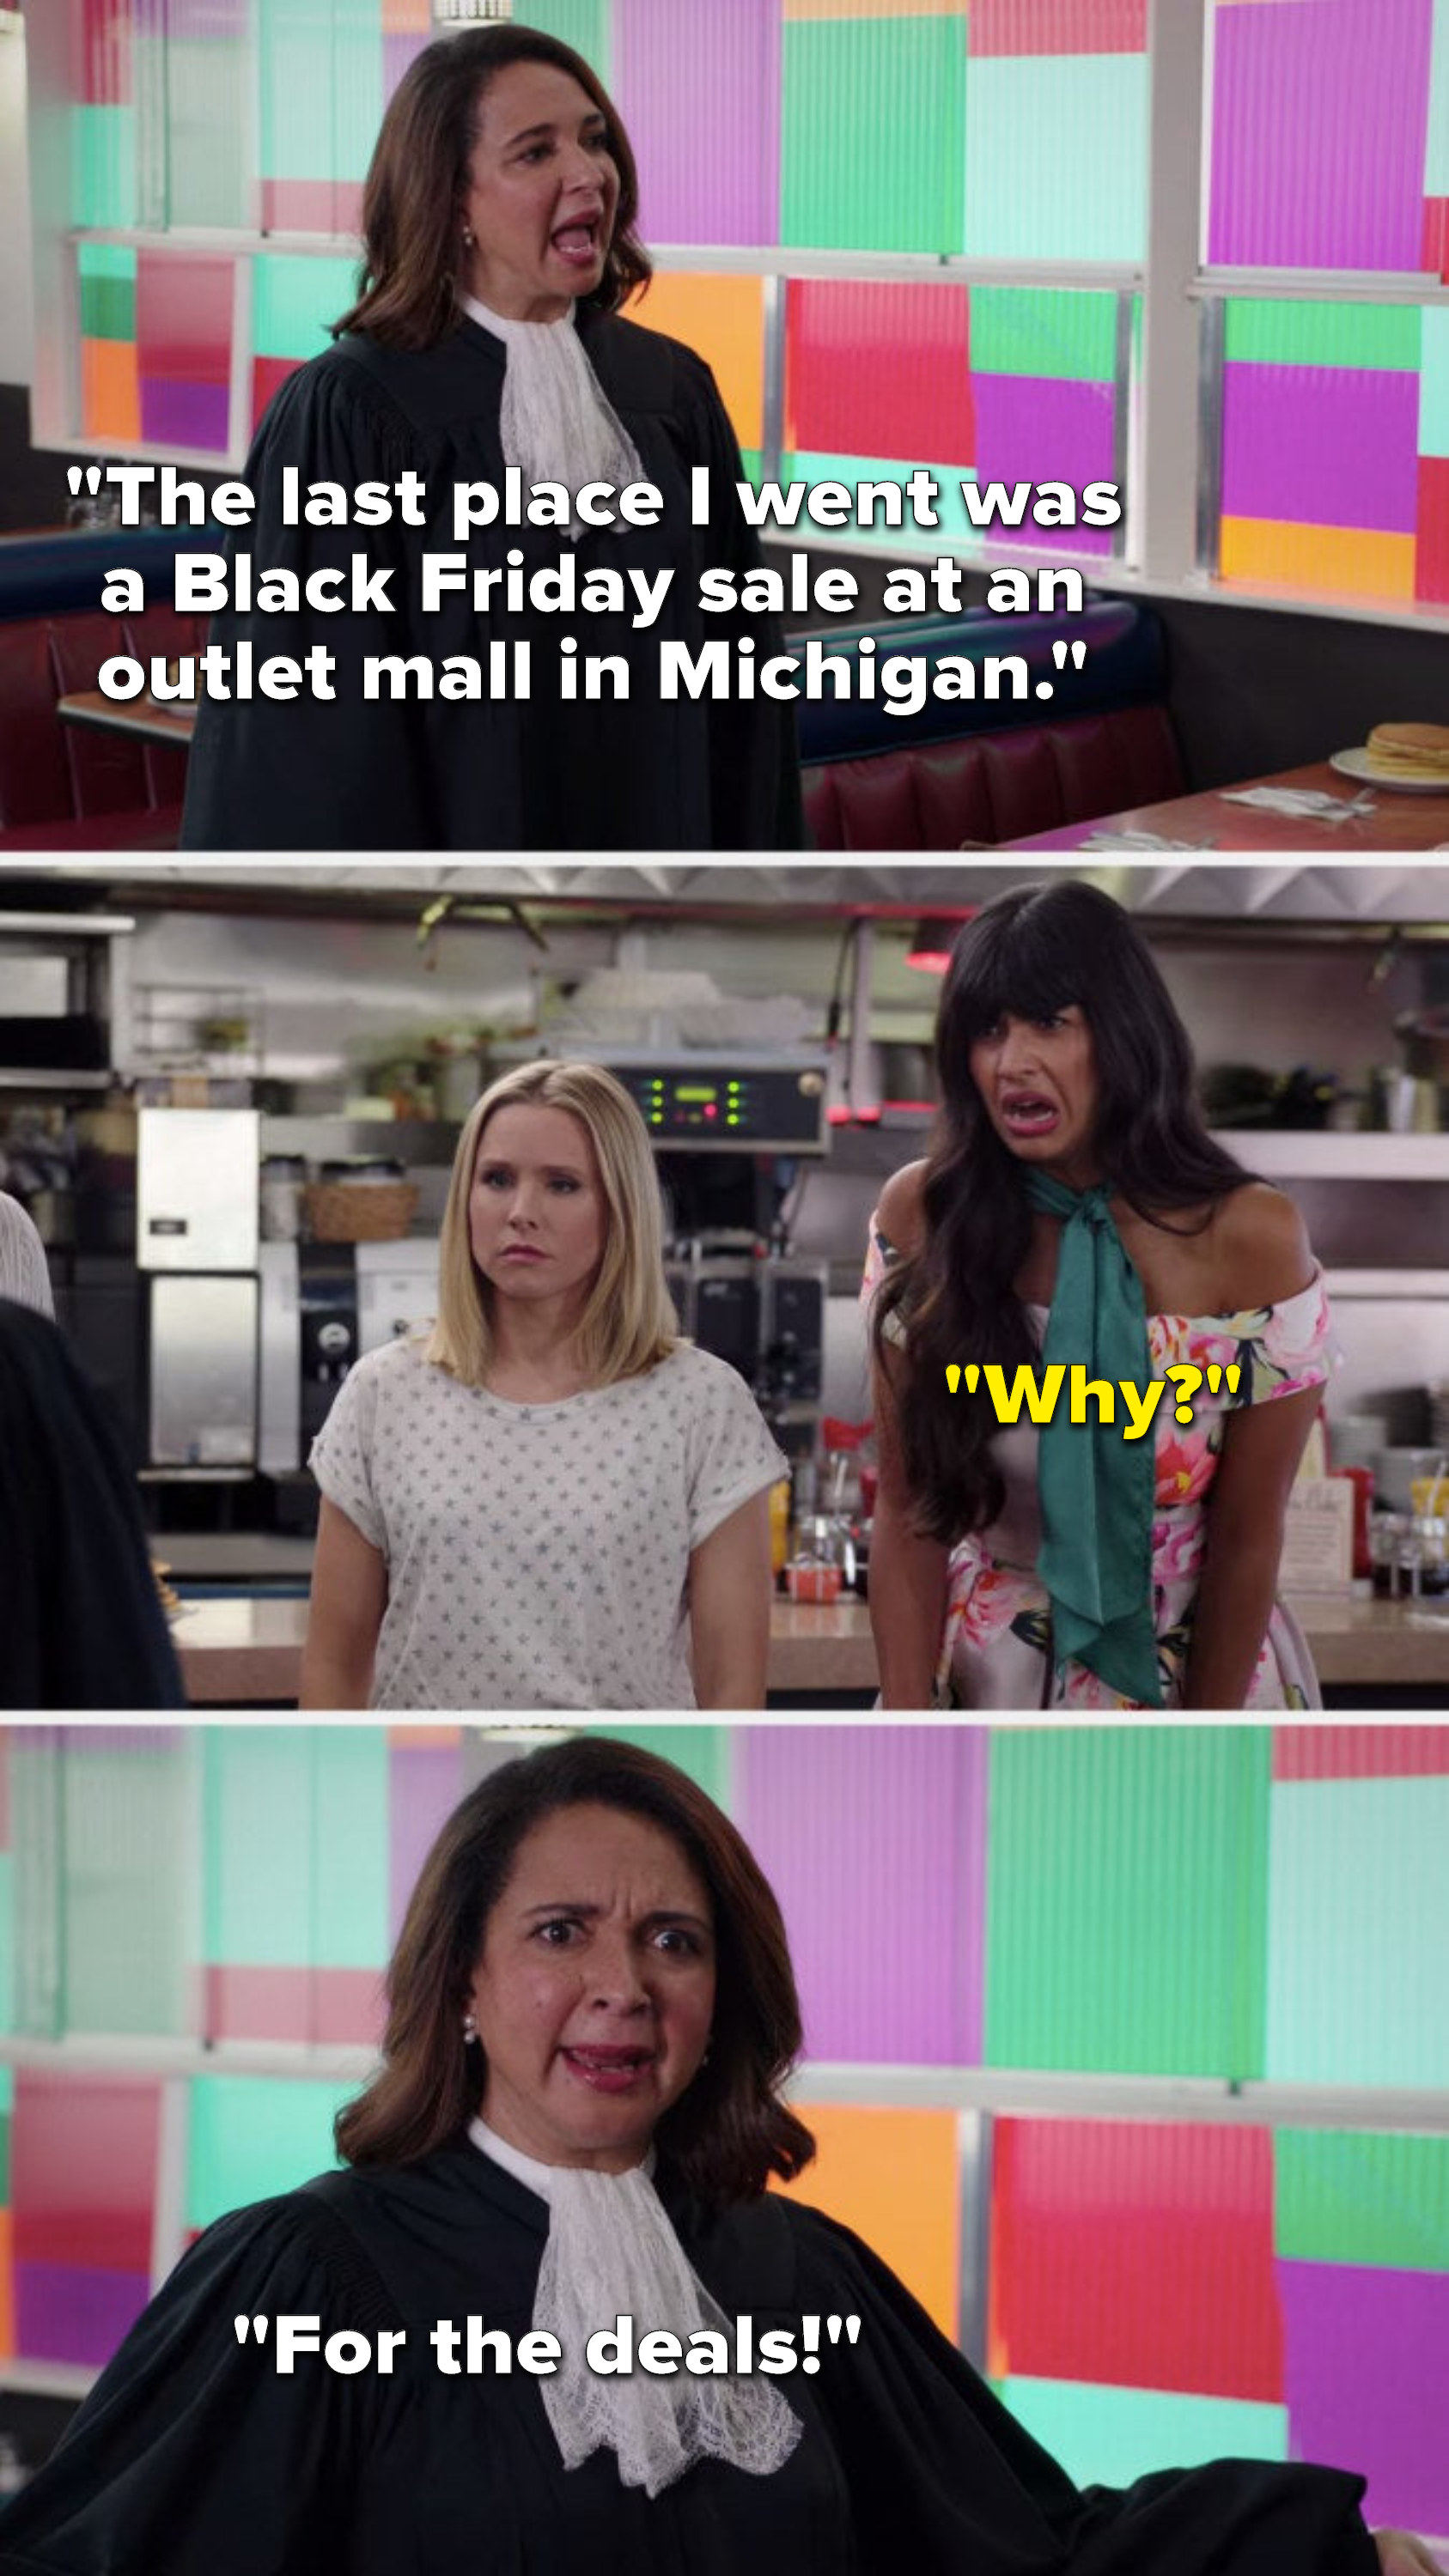 The Judge says disgusted, The last place I went was a Black Friday sale at an outlet mall in Michigan, Tahani asks, Why, and the Judge says, For the deals exclamation point